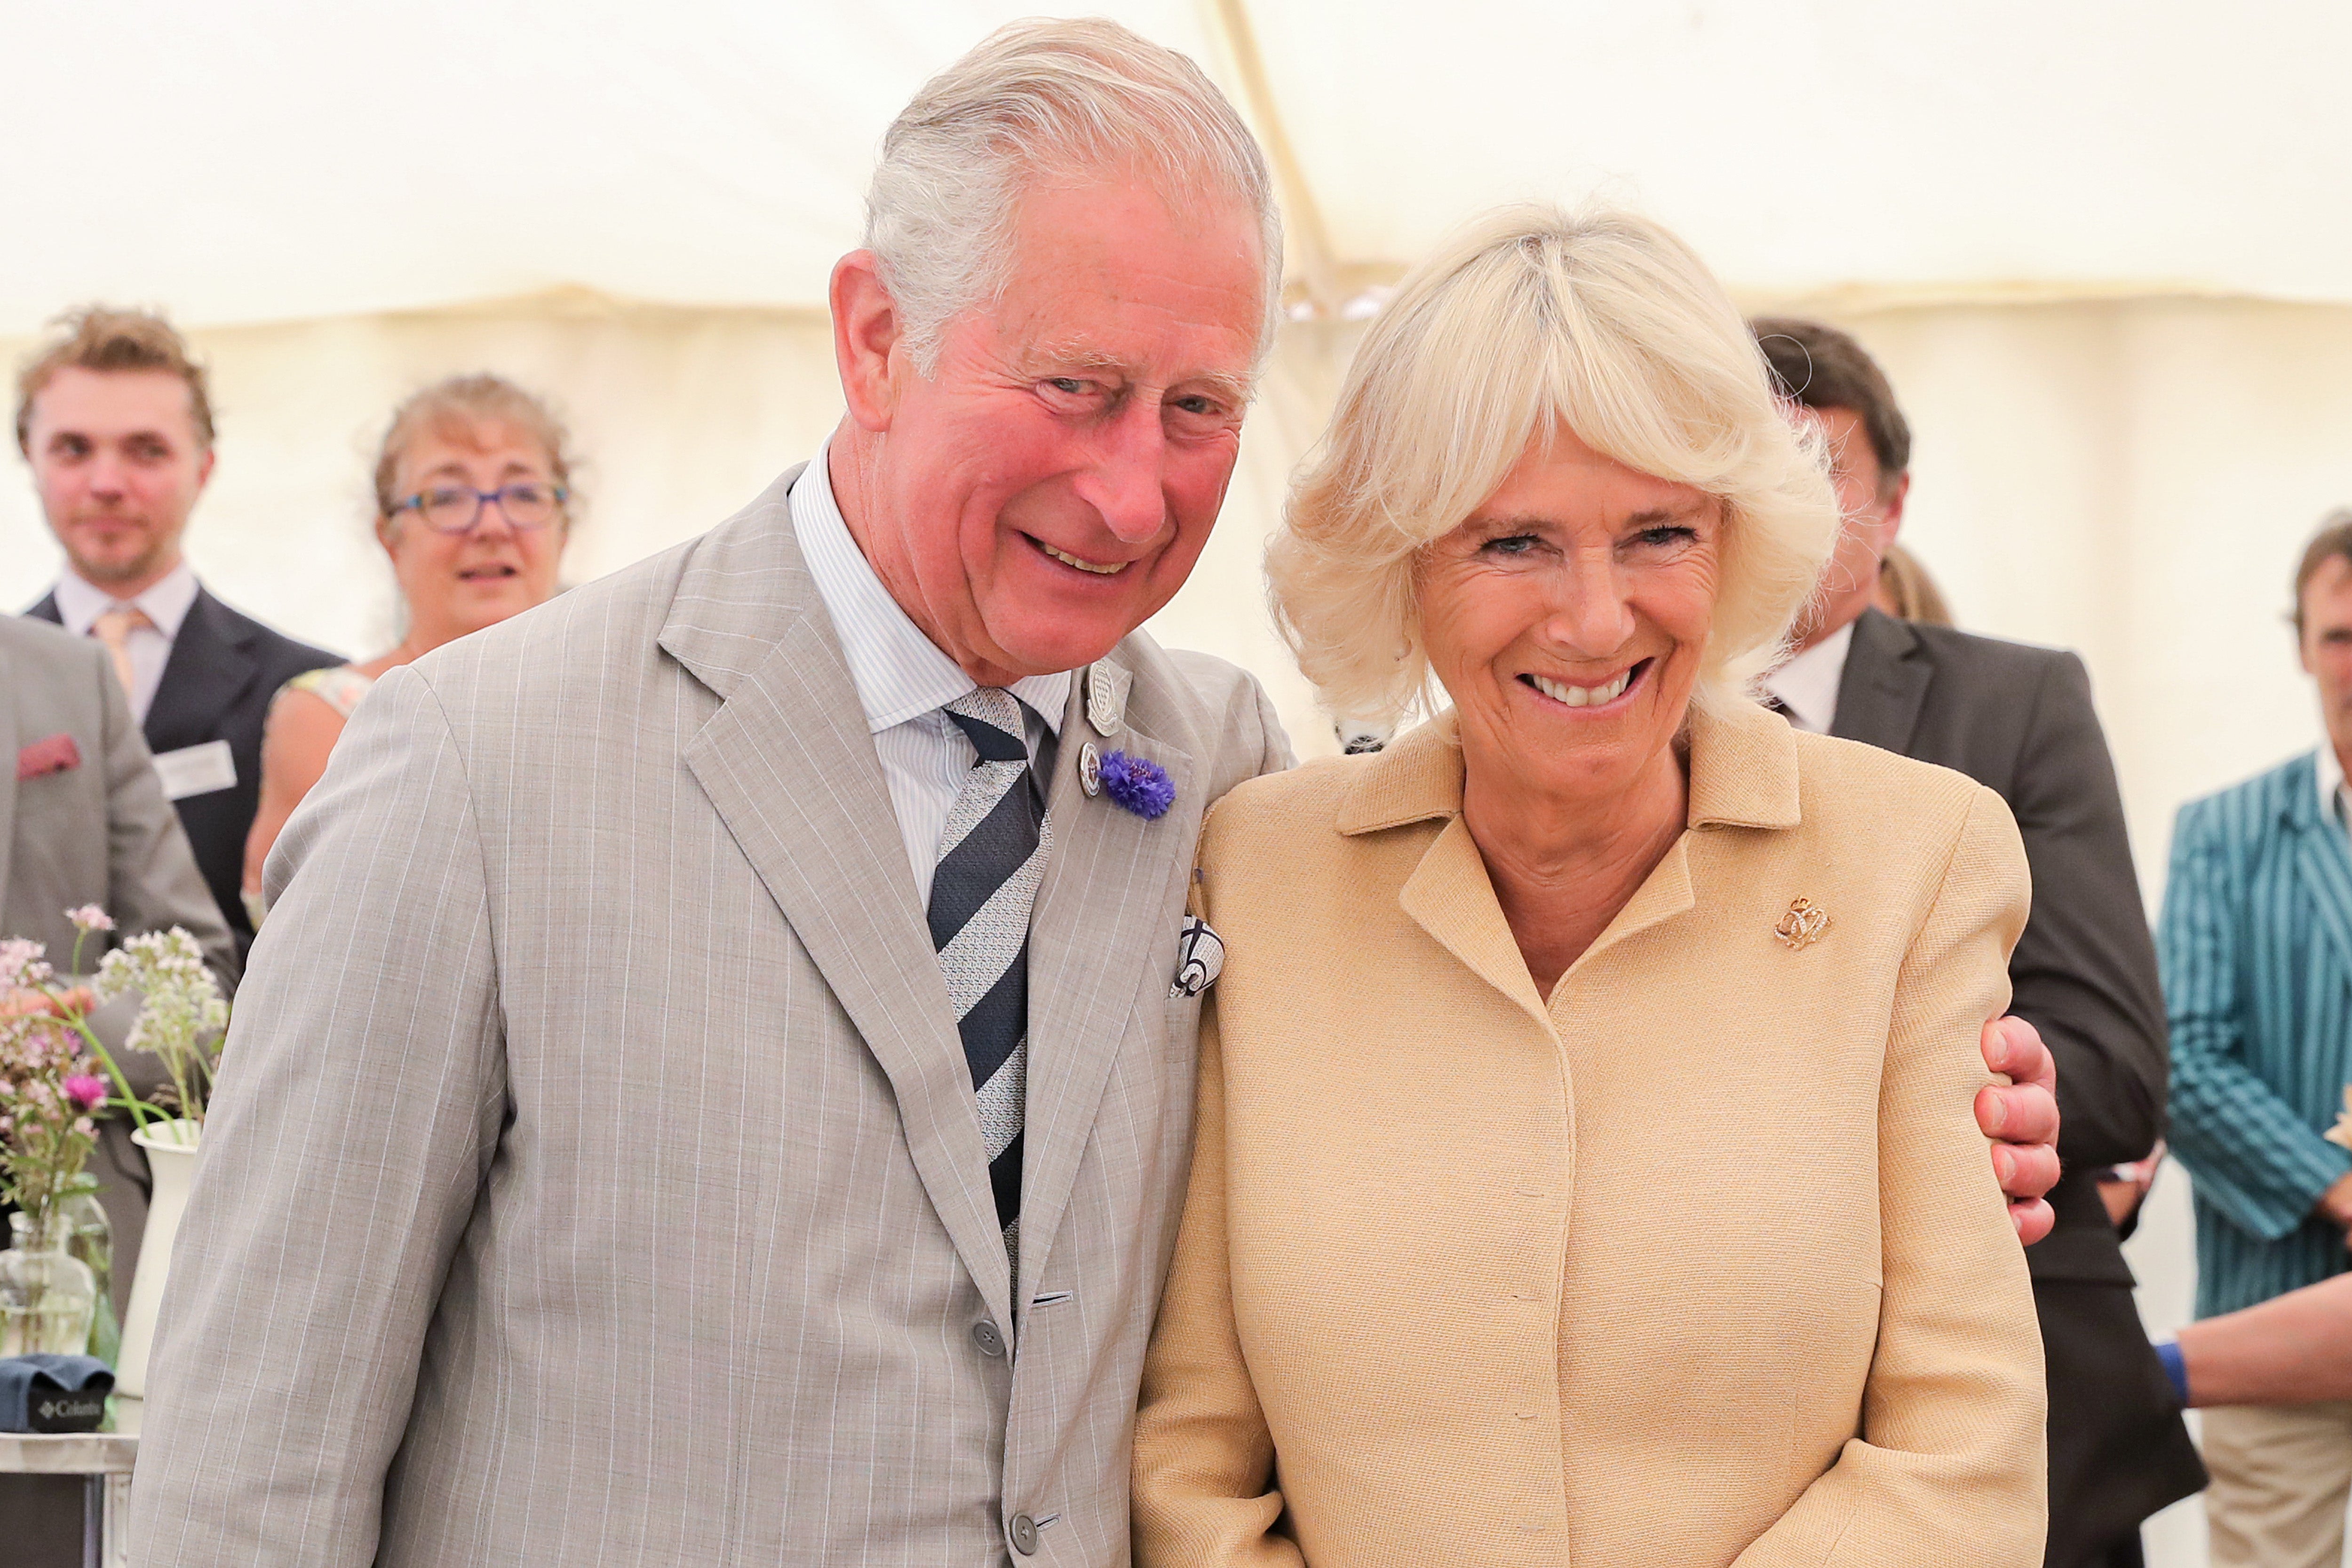 The King and Queen Consort in 2019, when Charles was still Prince of Wales